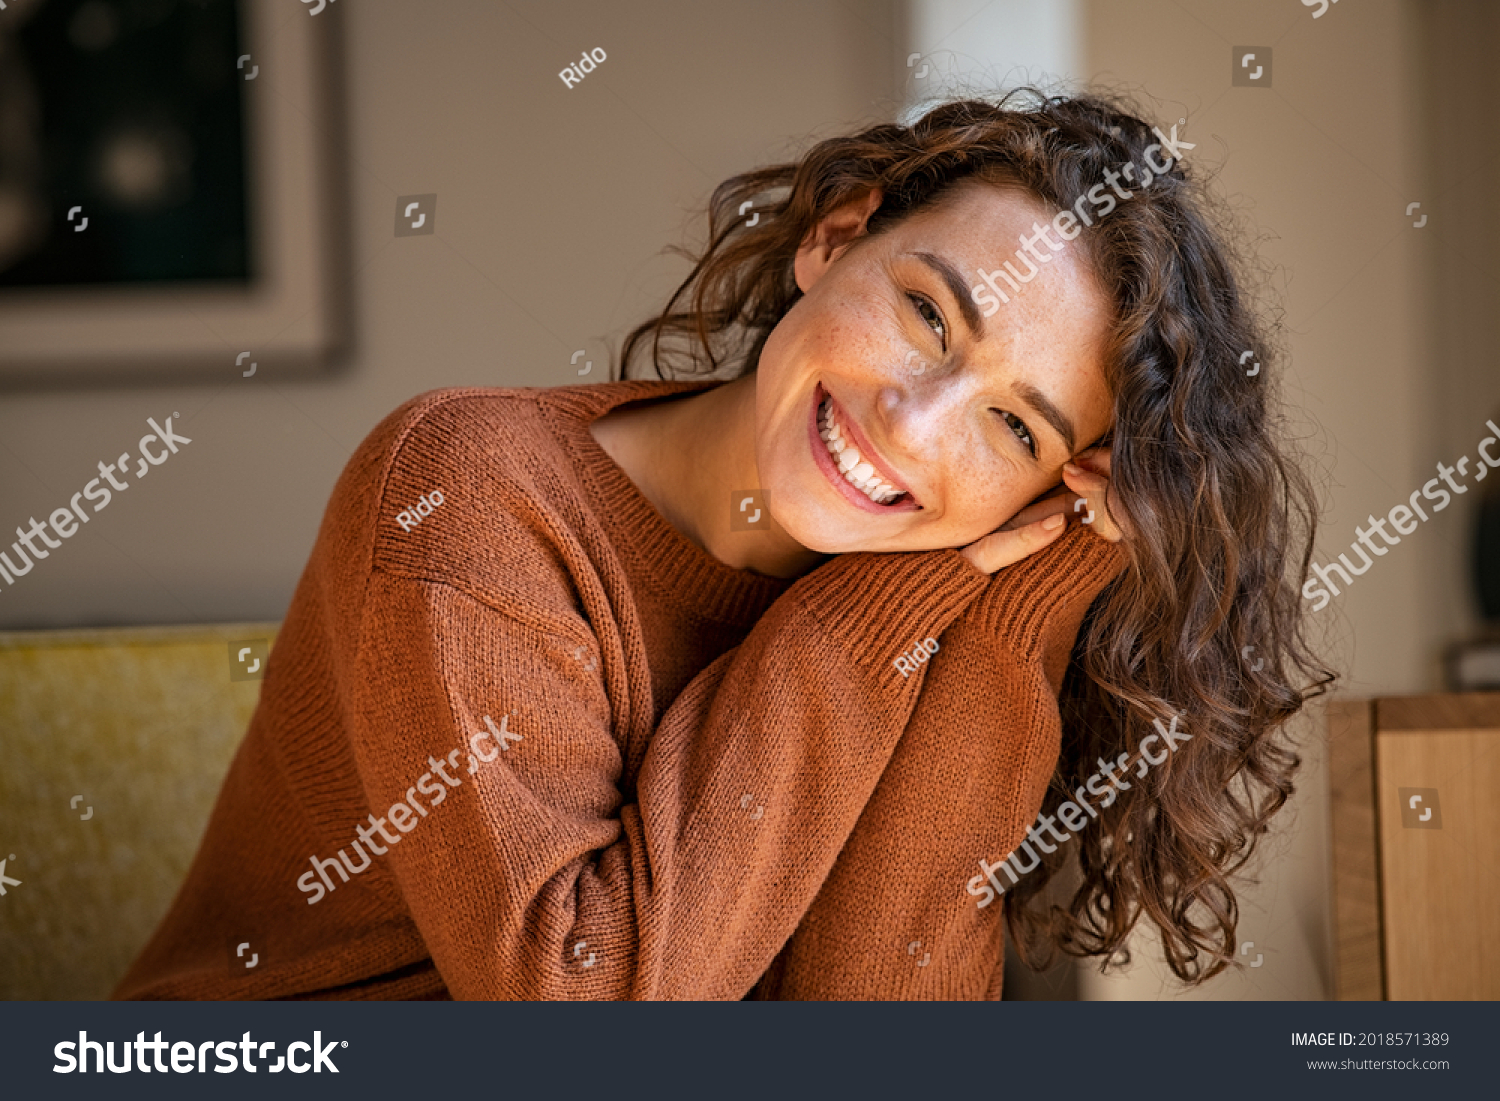 Happy young woman sitting on sofa at home and looking at camera. Portrait of comfortable woman in winter clothes relaxing on armchair. Portrait of beautiful girl smiling and relaxing during autumn. #2018571389